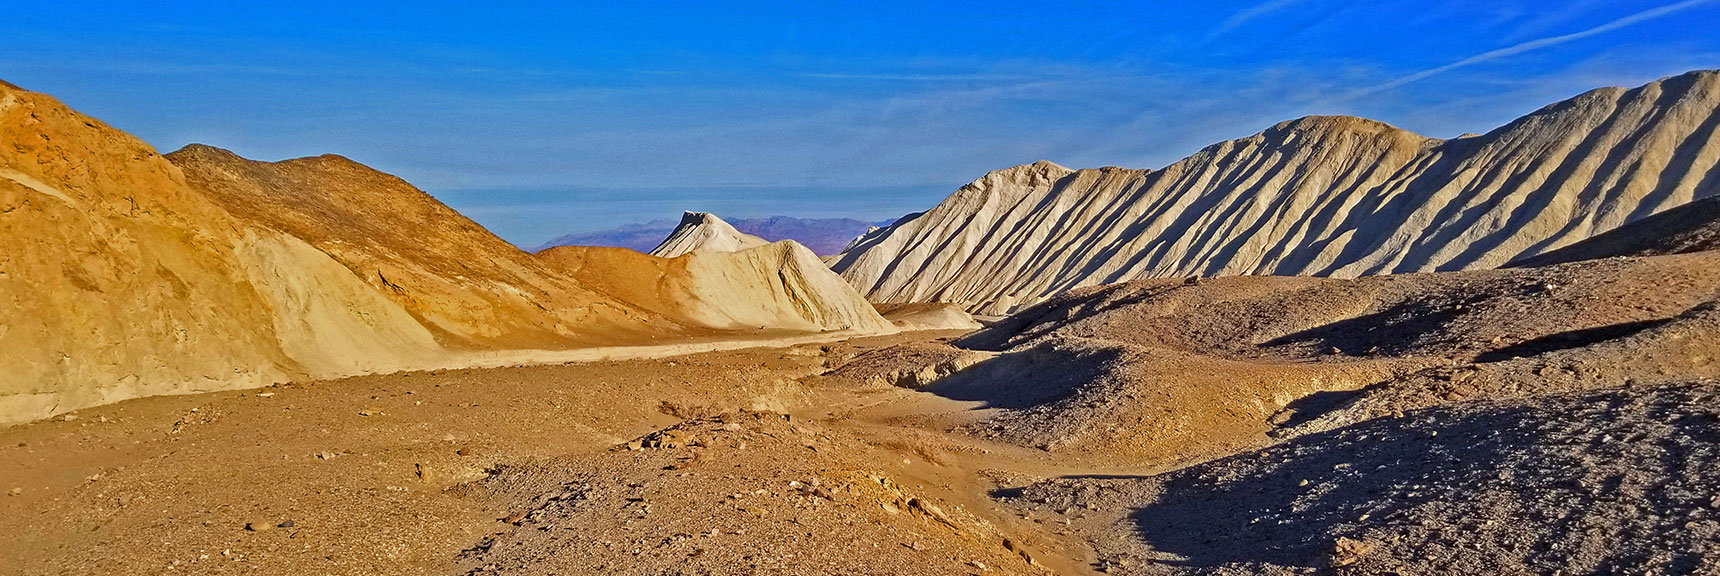 Winding Through the Badlands Toward Canyon Entrance Just Above Zabriskie Point. | Twenty Mule Team Canyon | Death Valley National Park, California